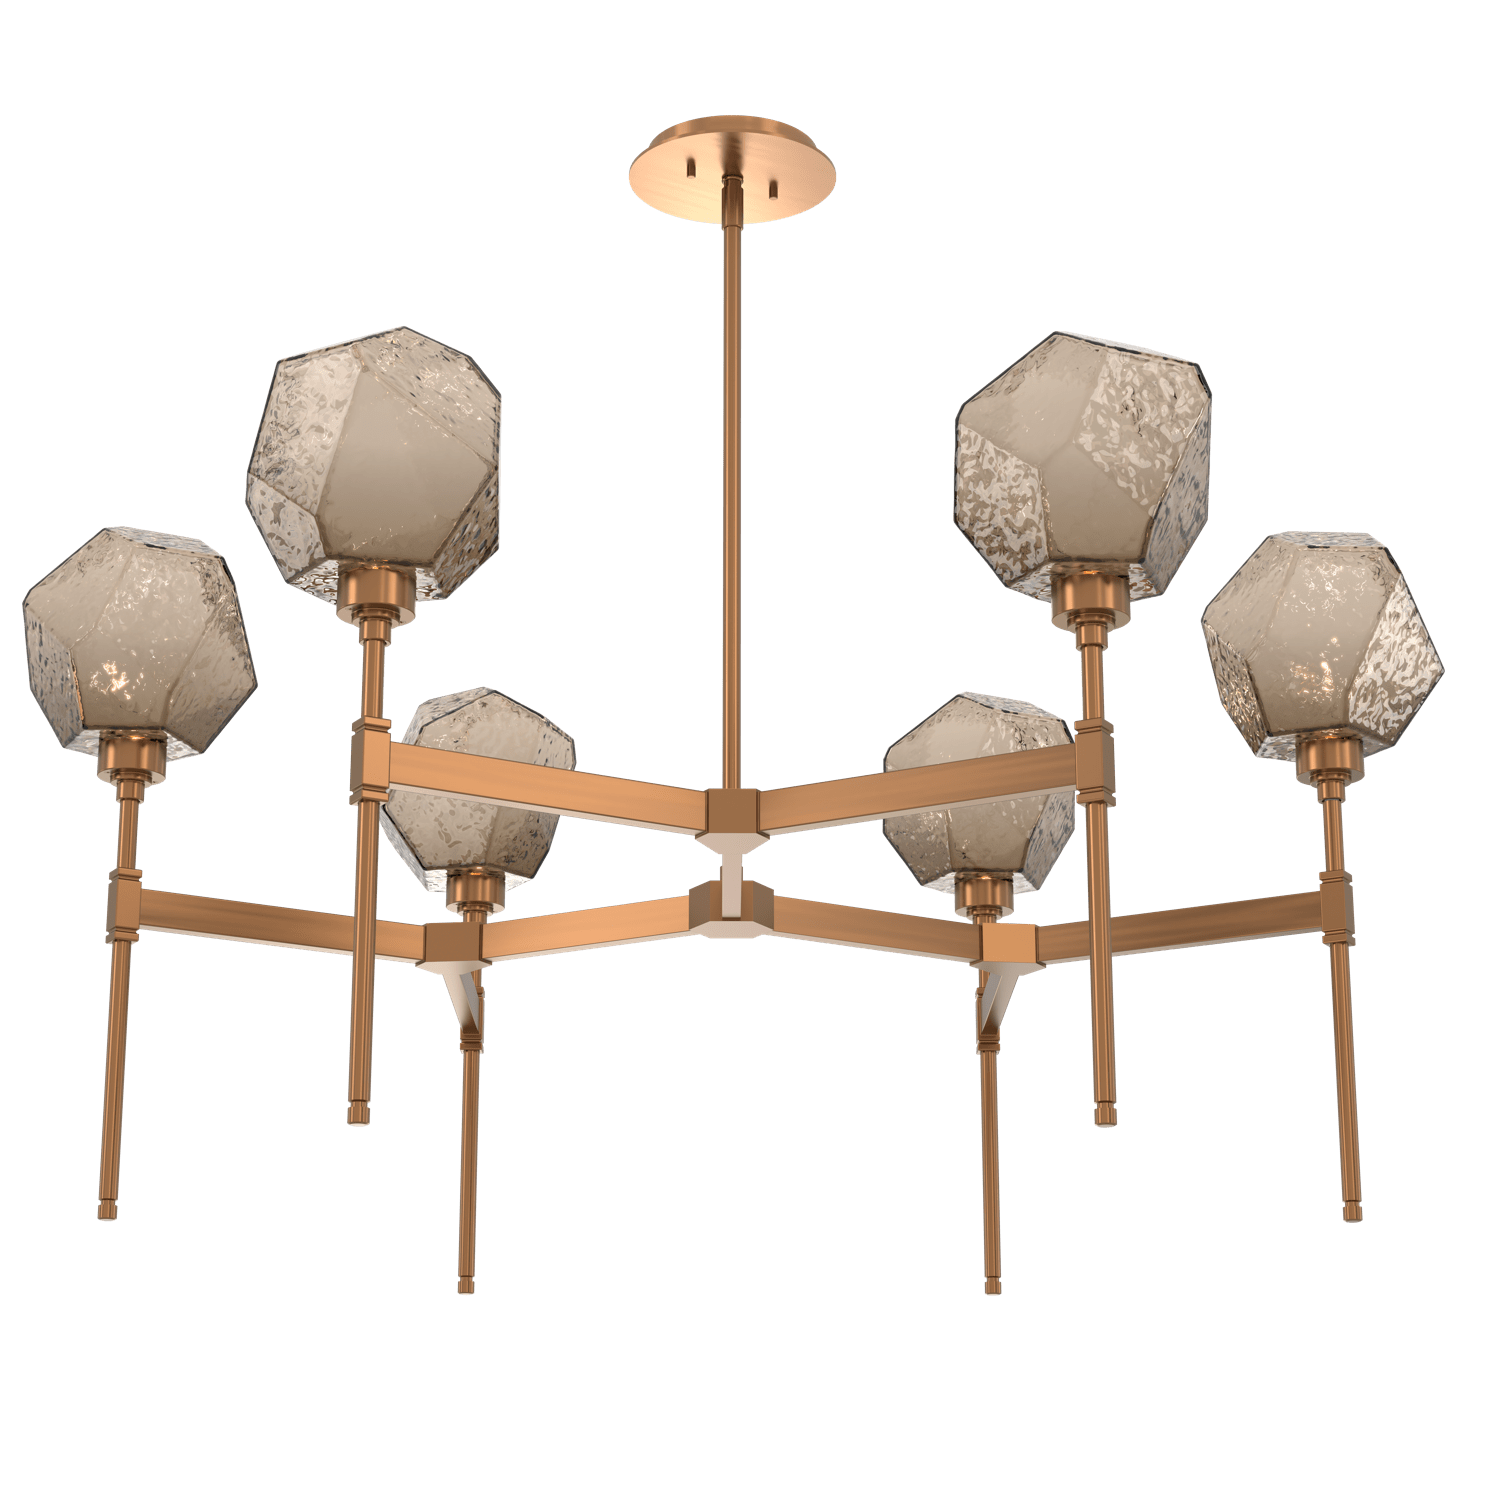 CHB0039-39-RB-B-Hammerton-Studio-Gem-round-belvedere-chandelier-with-oil-rubbed-bronze-finish-and-bronze-blown-glass-shades-and-LED-lamping